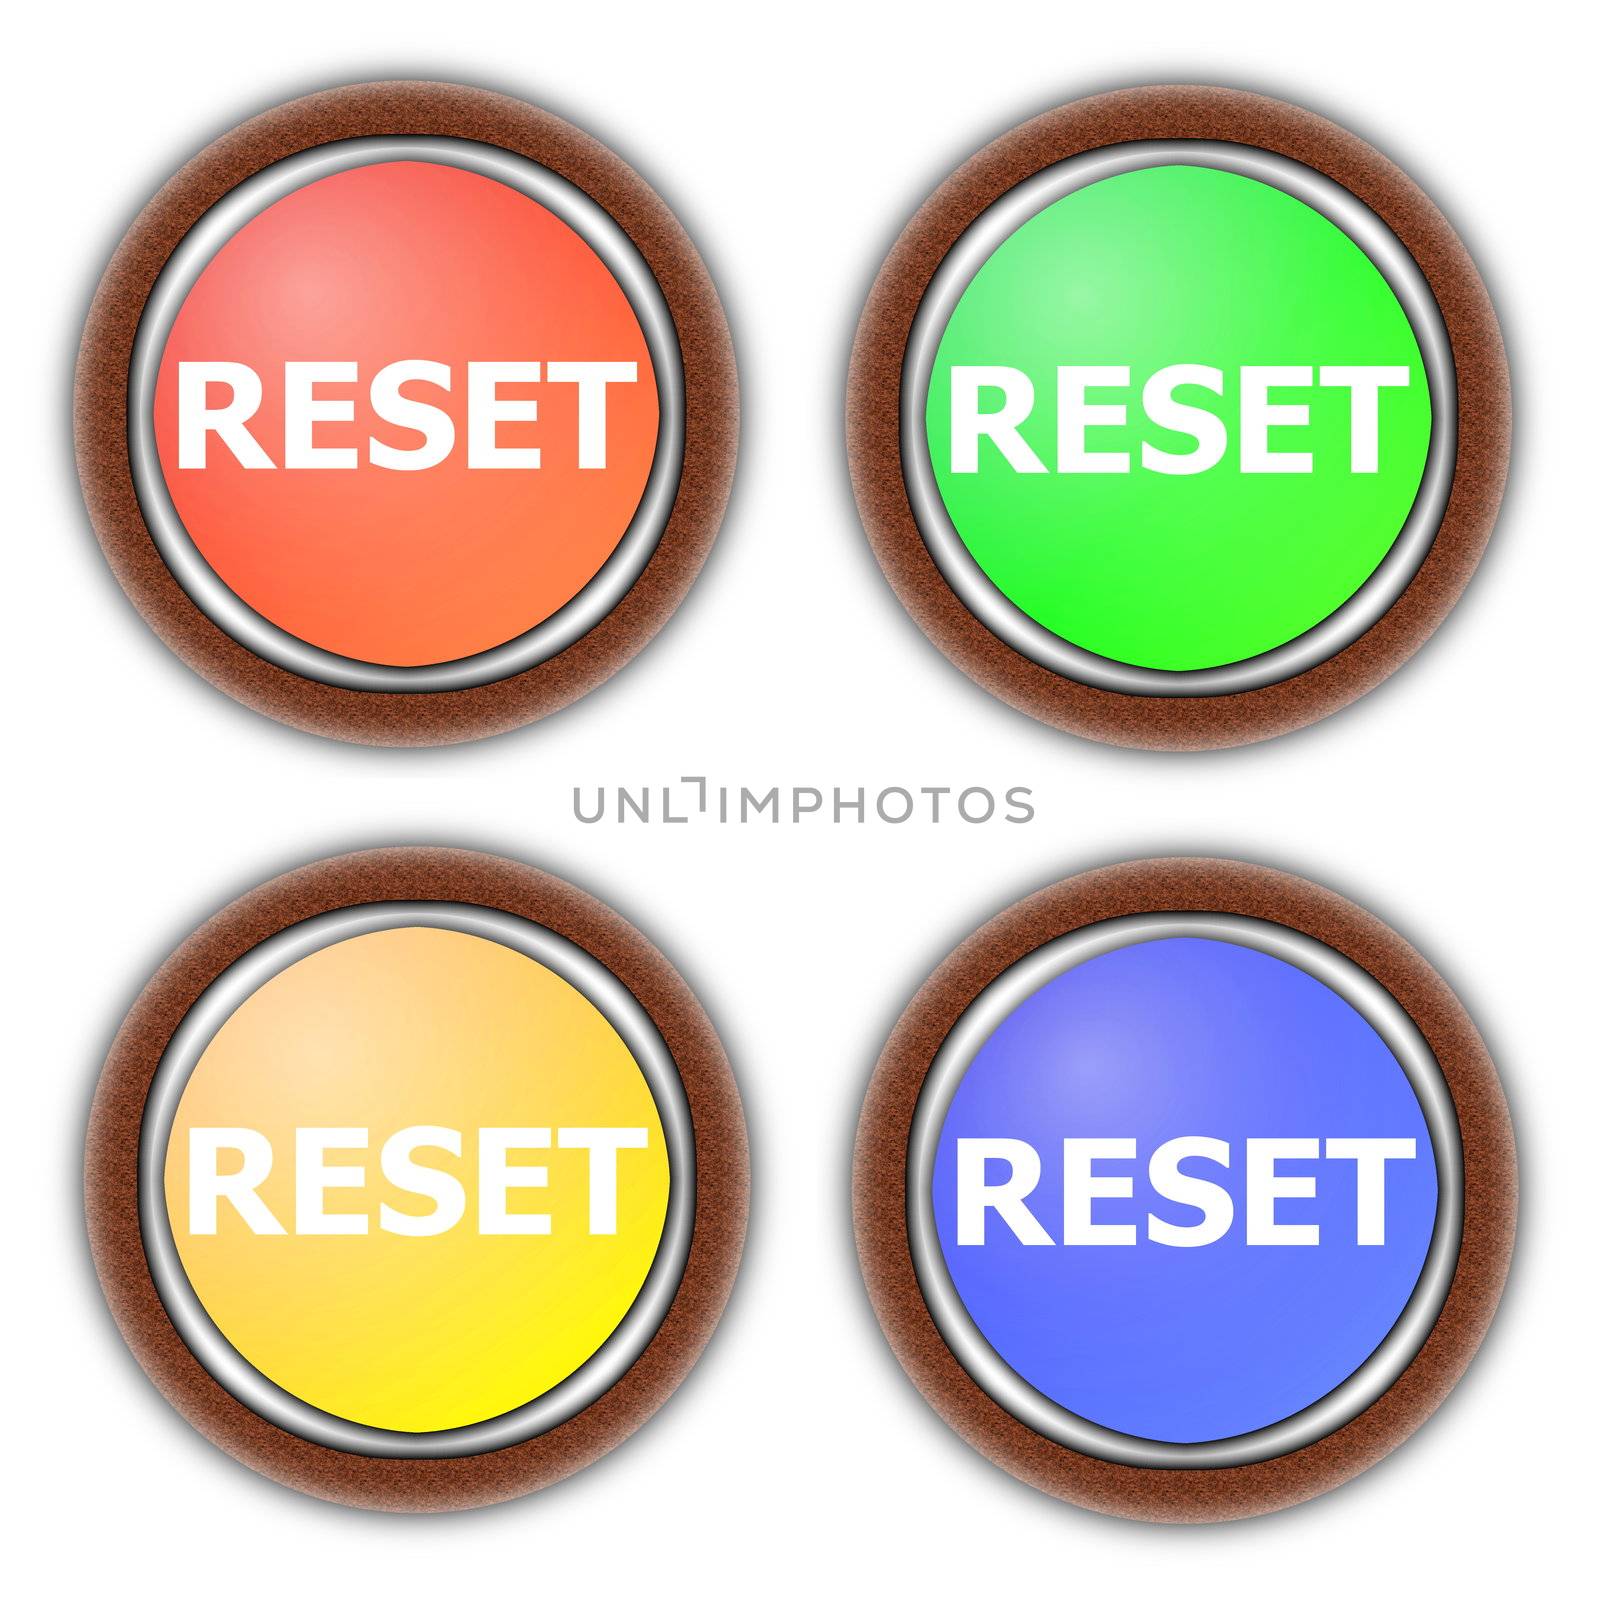 reset button collection isolated on white background